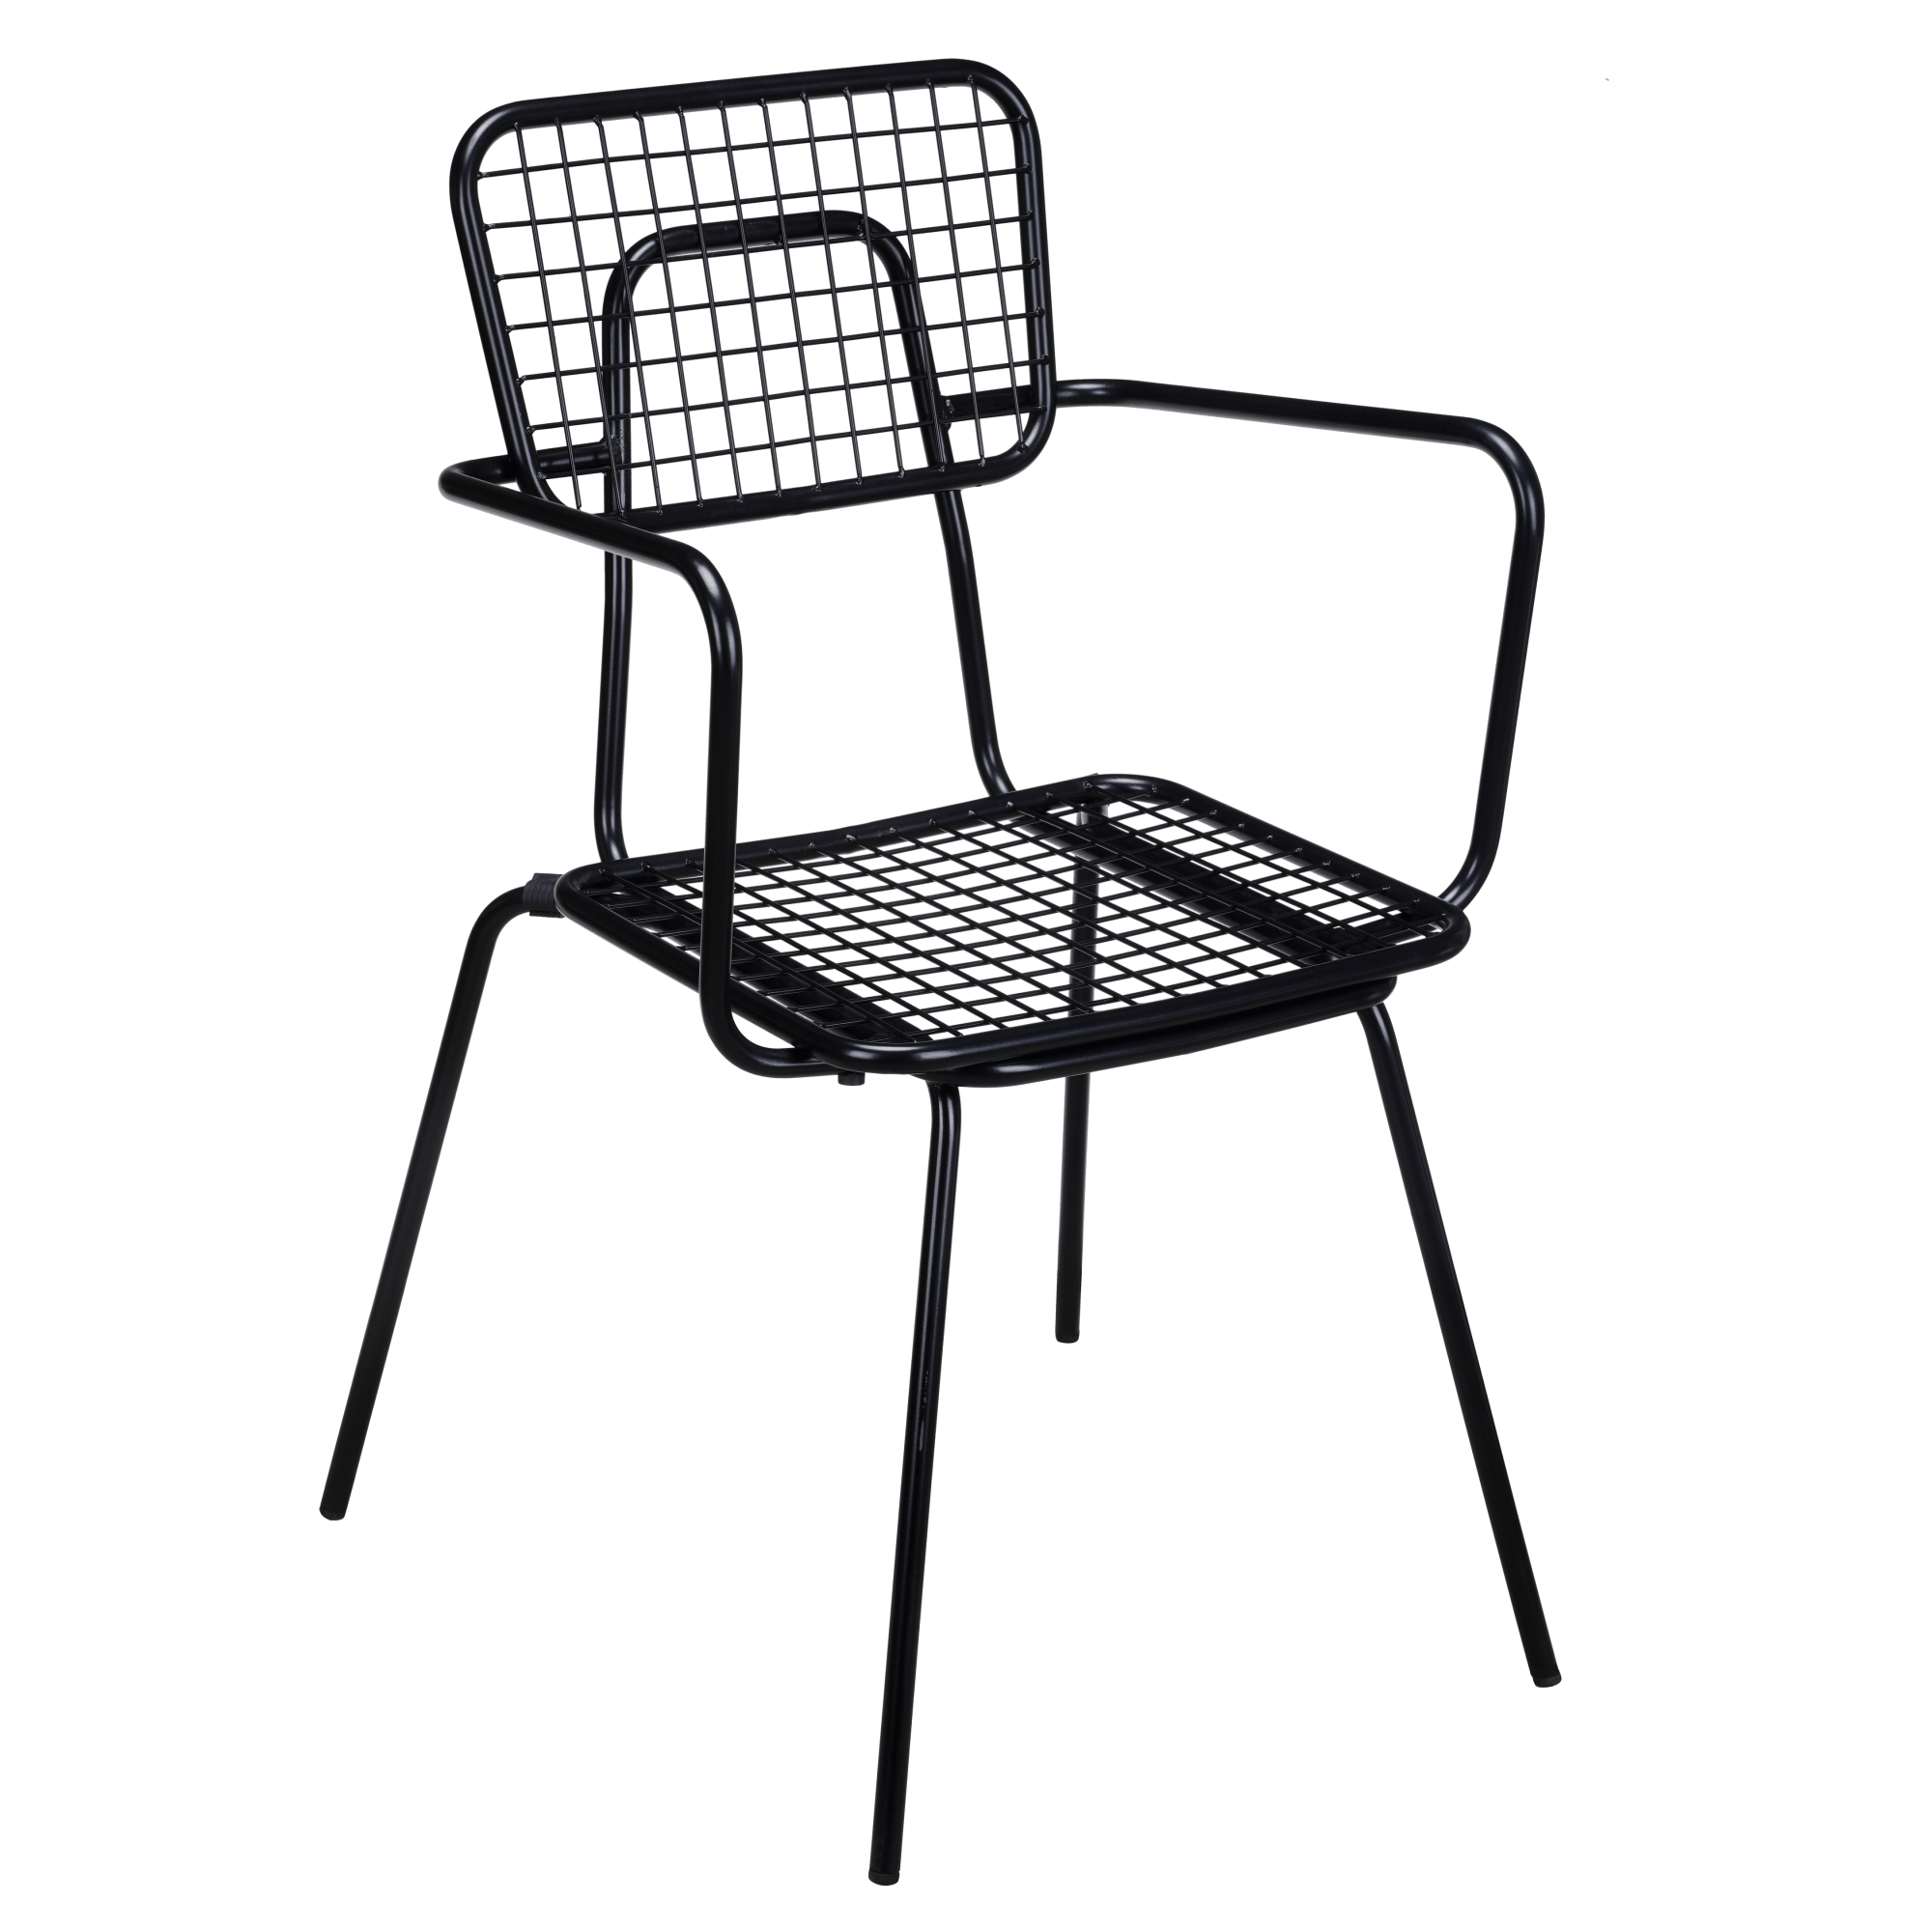 Ollie Patio Arm Chair in Black Finish with Ollie Patio Arm Chair in Black Finish